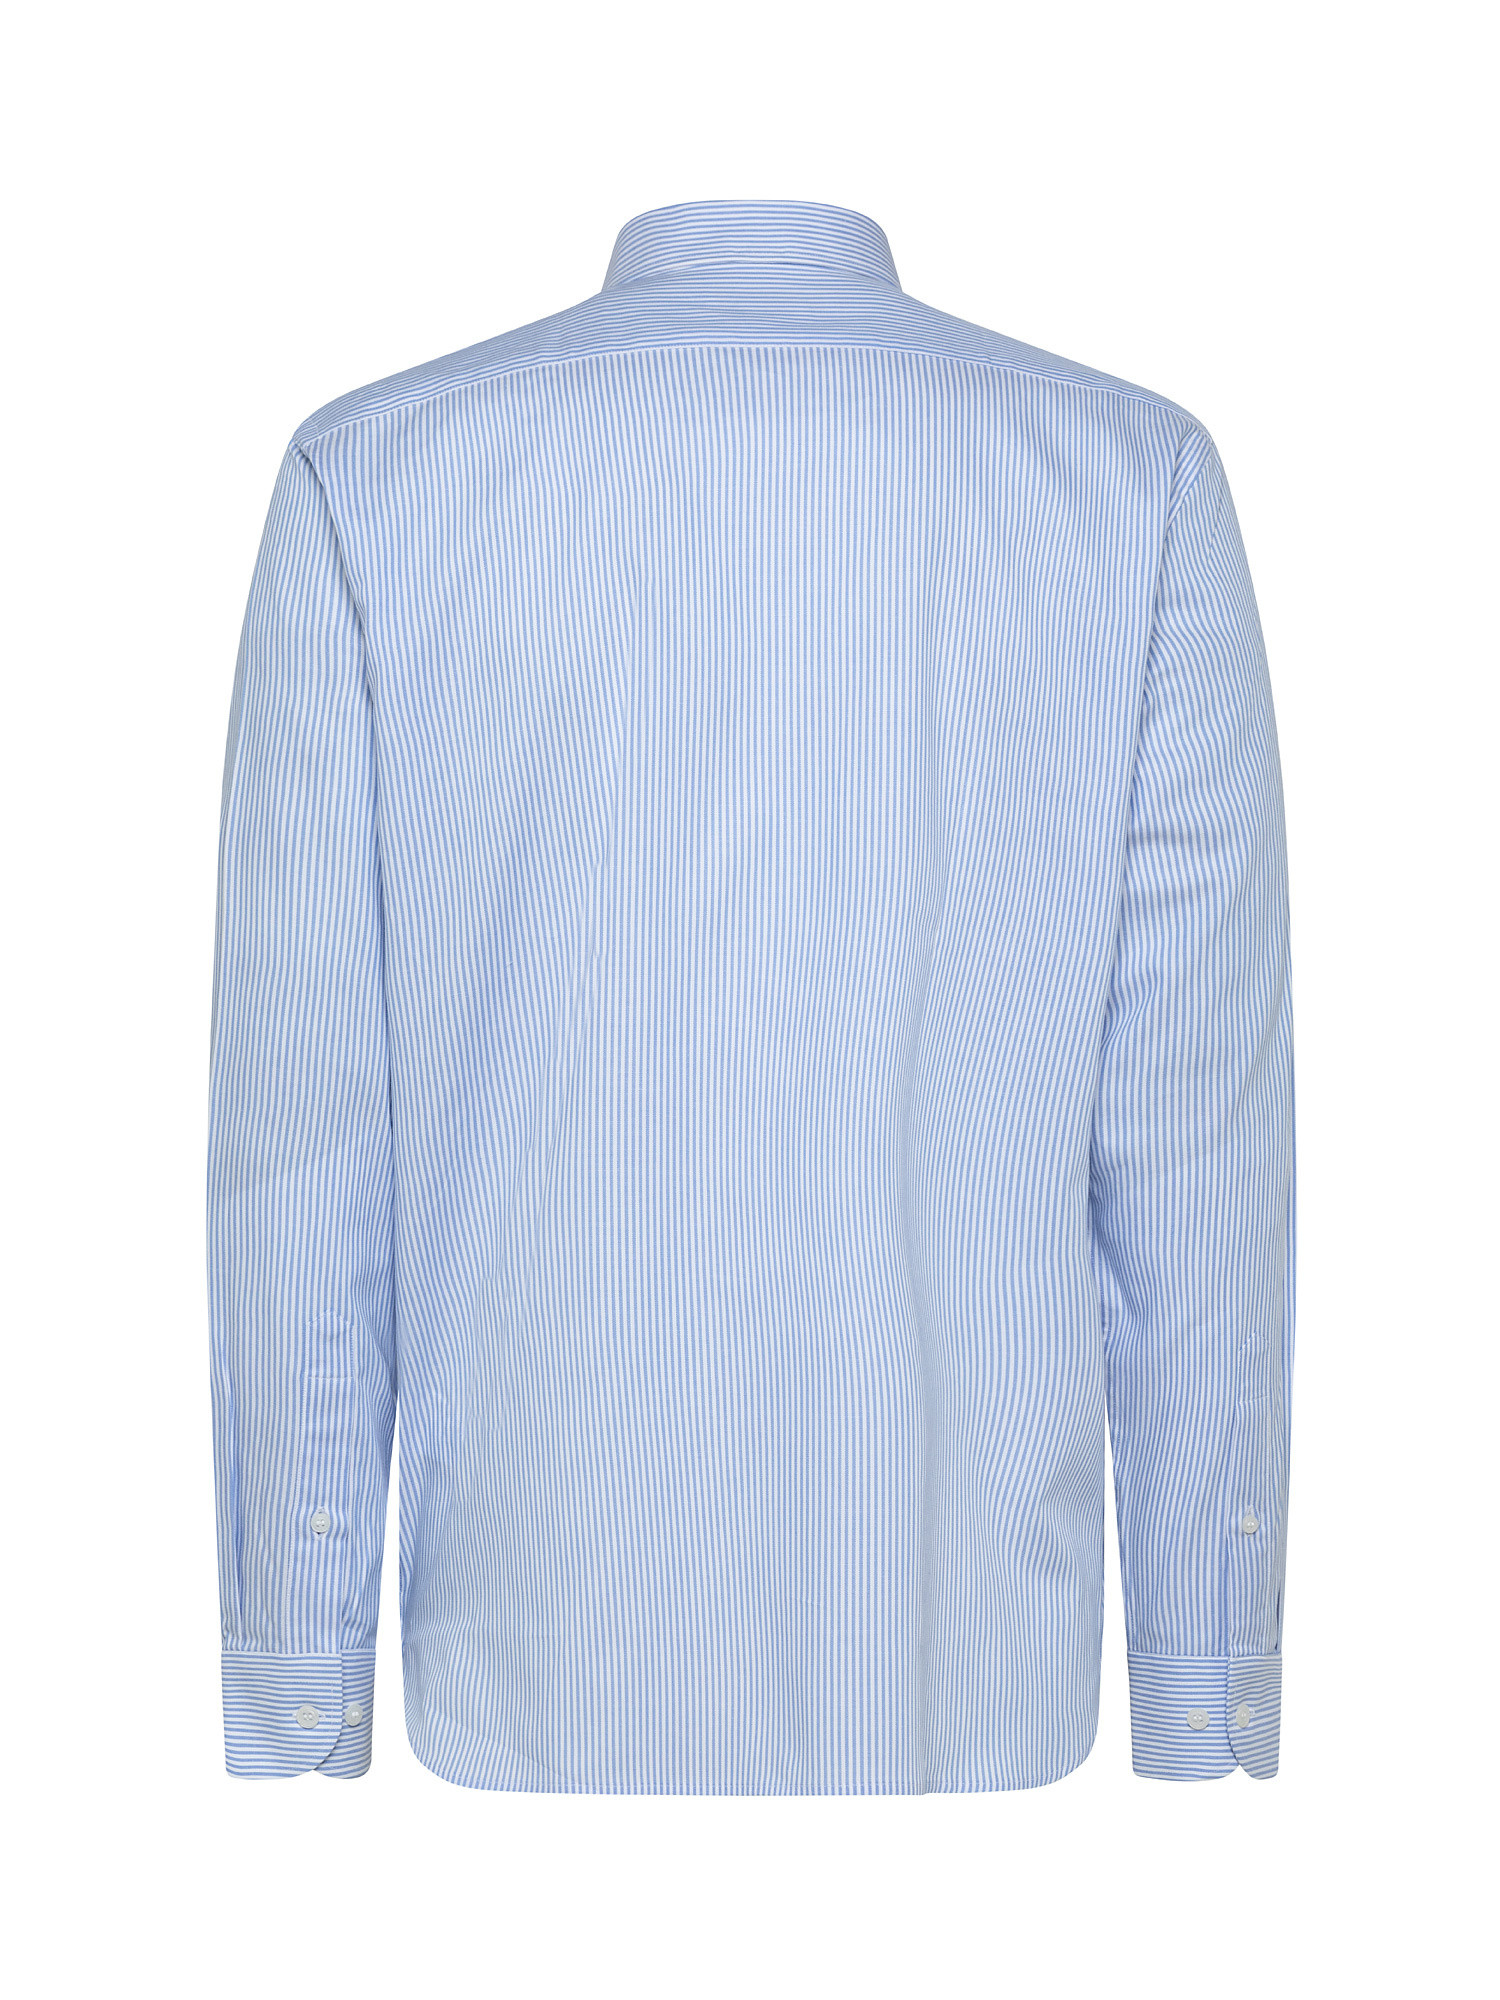 Camicia tailor fit in cotone oxford, Azzurro, large image number 1